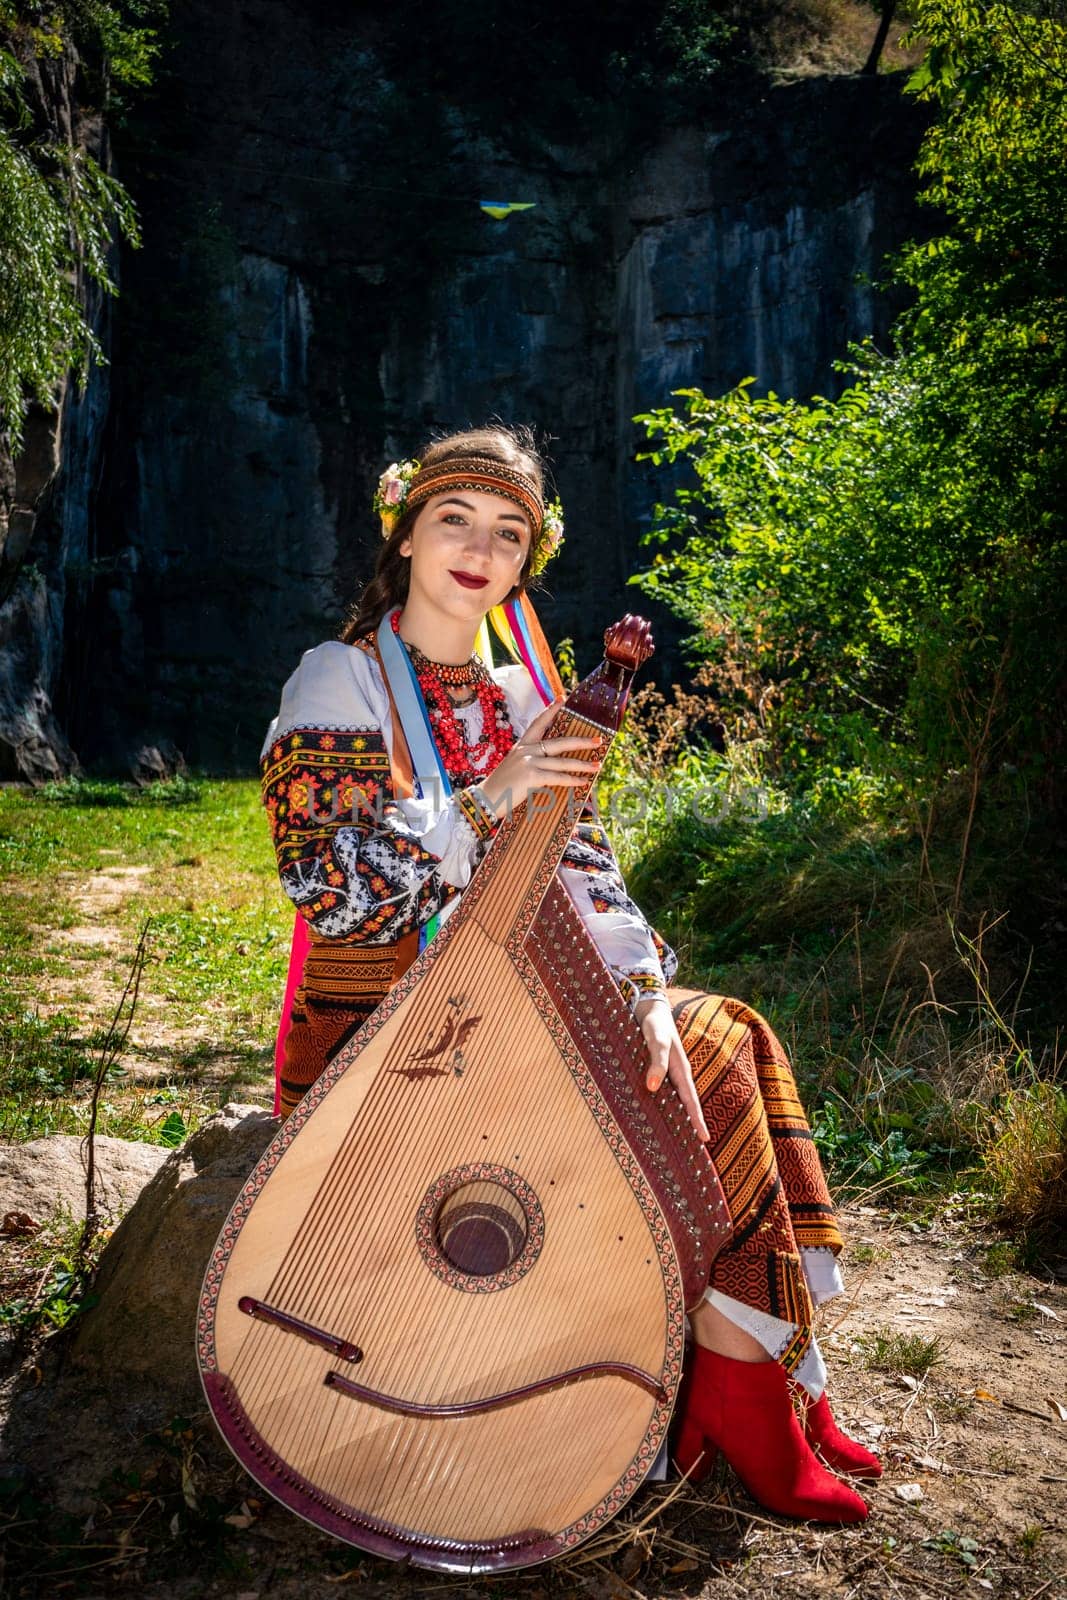 Ukrainian musician in authentic national dress sits by a rock. Ukrainian woman with a bandura musical instrument before performing folk music